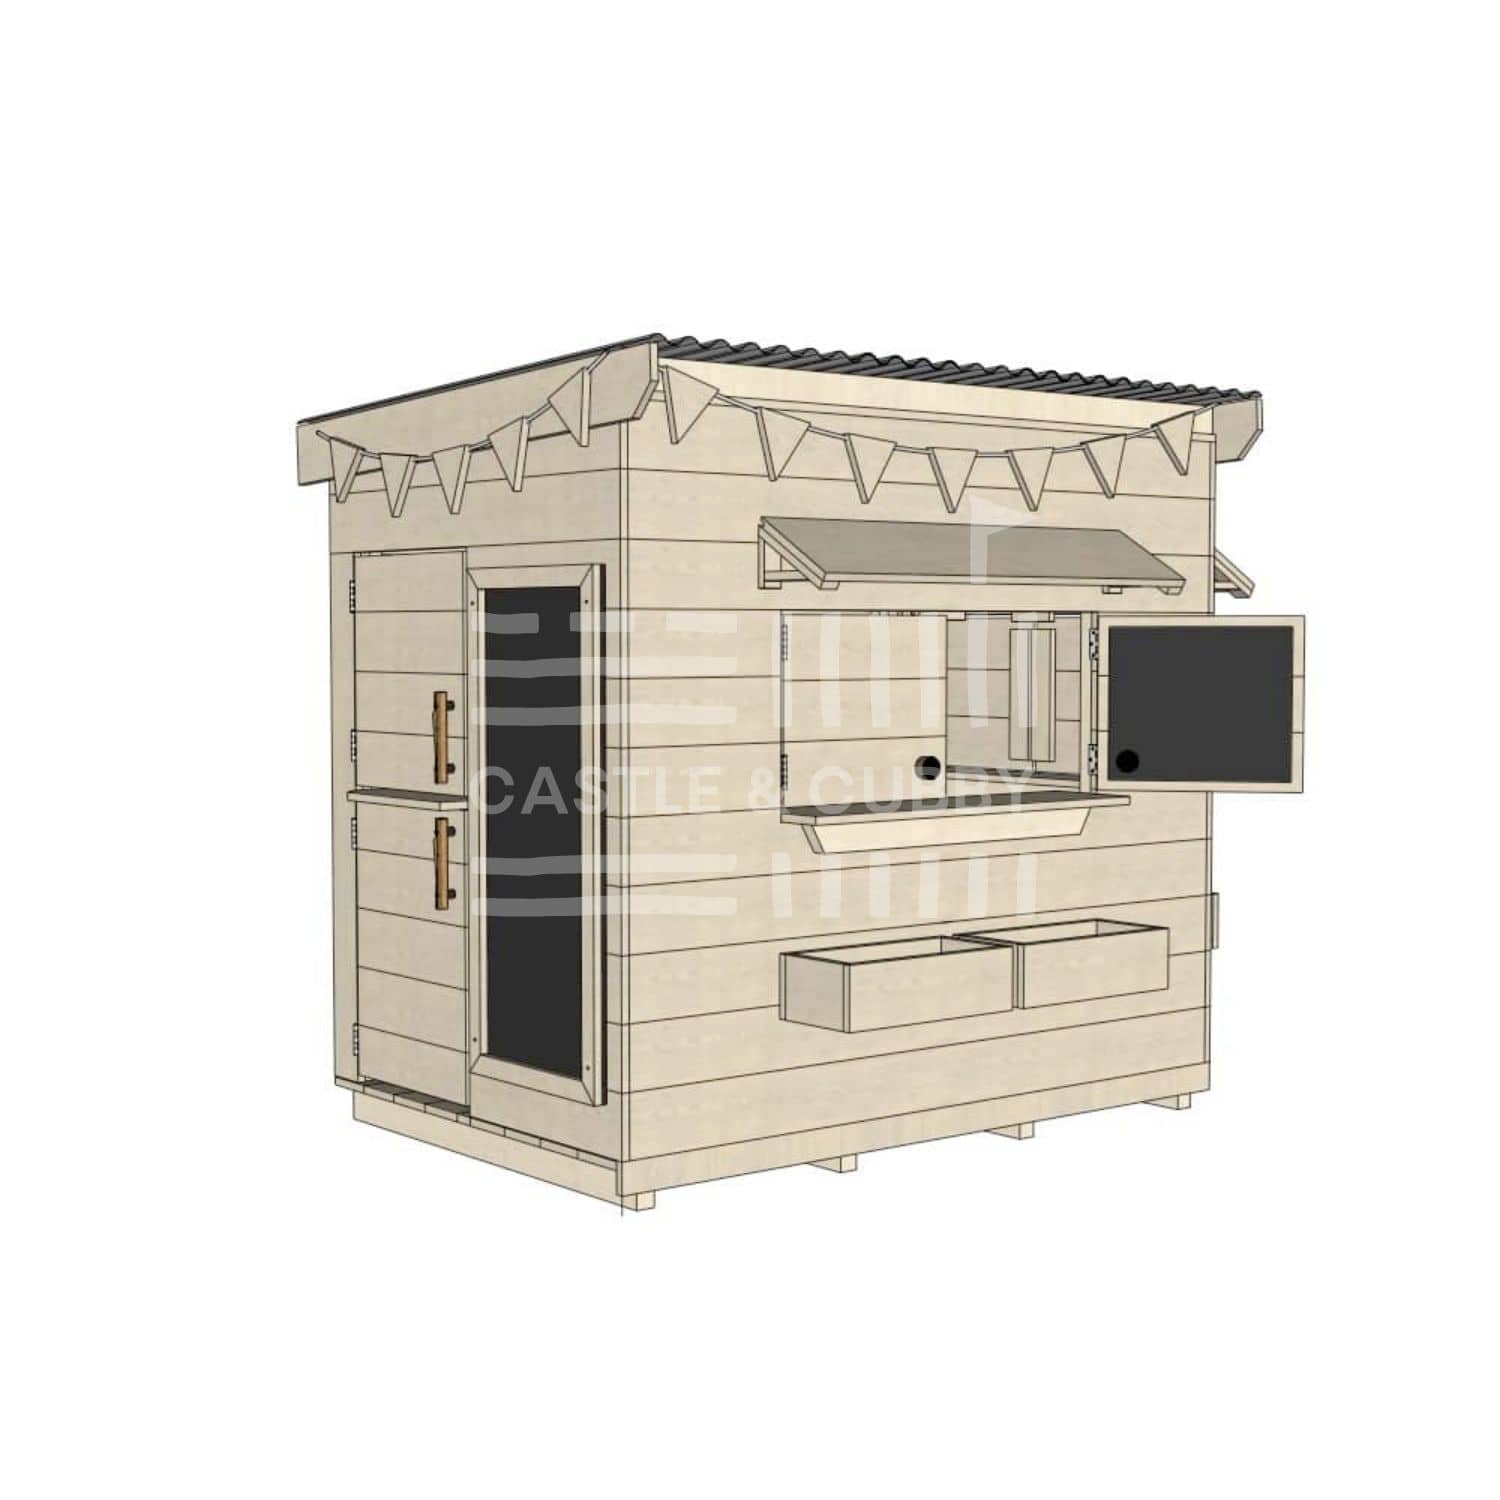 Flat roof raw wooden cubby house family backyard little rectangle size with accessories